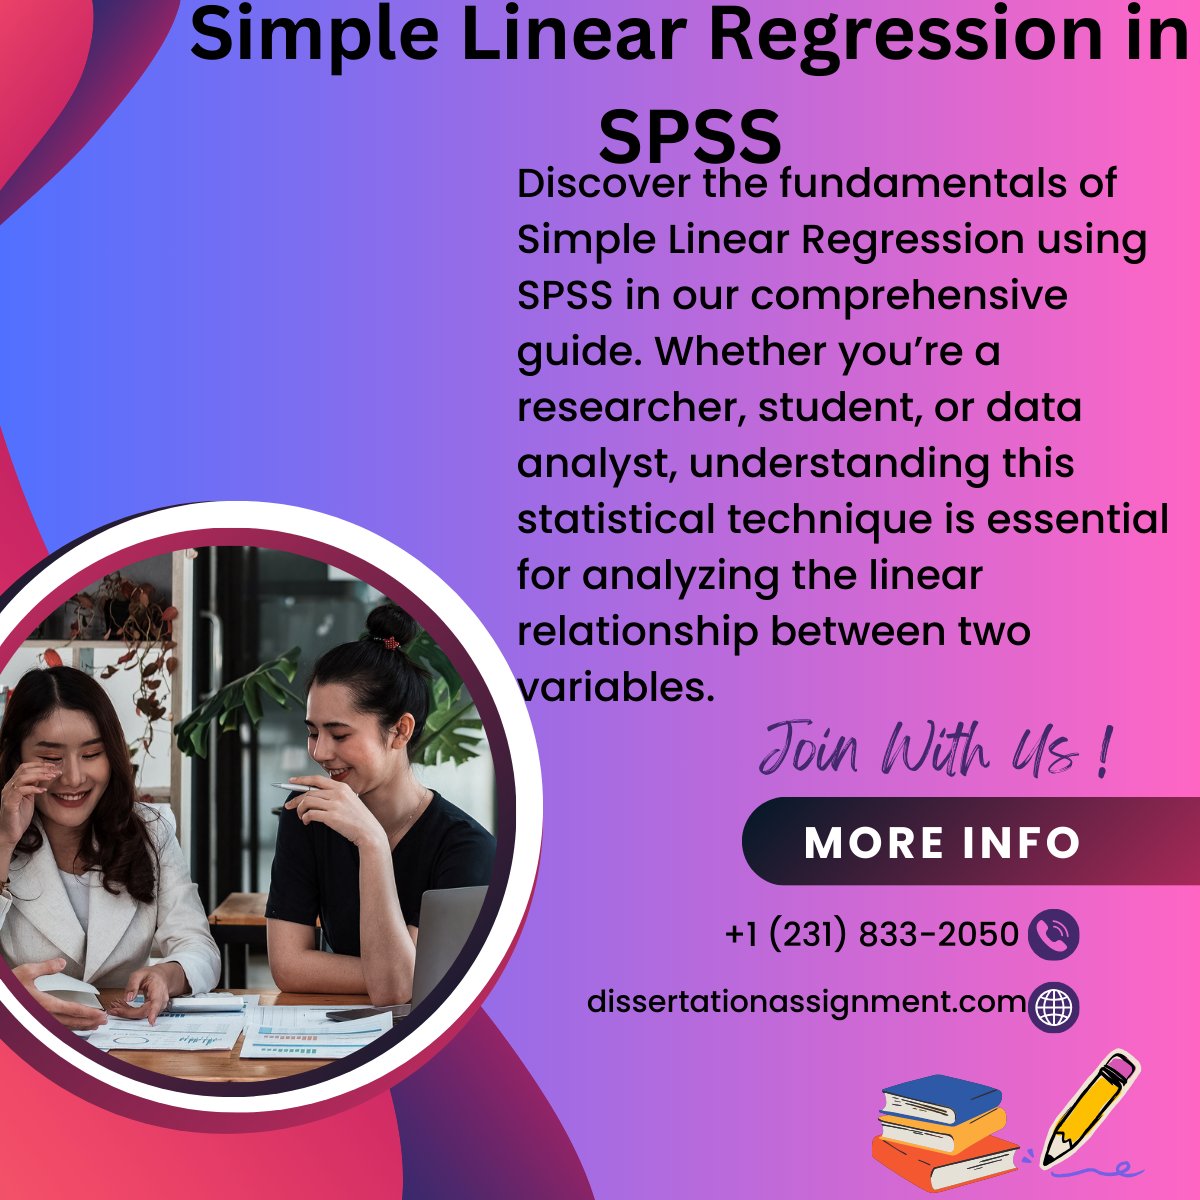 Simple Linear Regression in SPSS
#SimpleLinearRegressioninSPSS
#SimpleLinearRegressionSPSS
#SimpleLinearRegression
#LinearRegressioninSPSS 
#LinearRegressionSPSS
#SimpleLinearinSPSS
#SimpleLinearSPSS
WhatsApp Link:wa.link/r8suly
Order Now: dissertationassignment.com/simple-linear-…